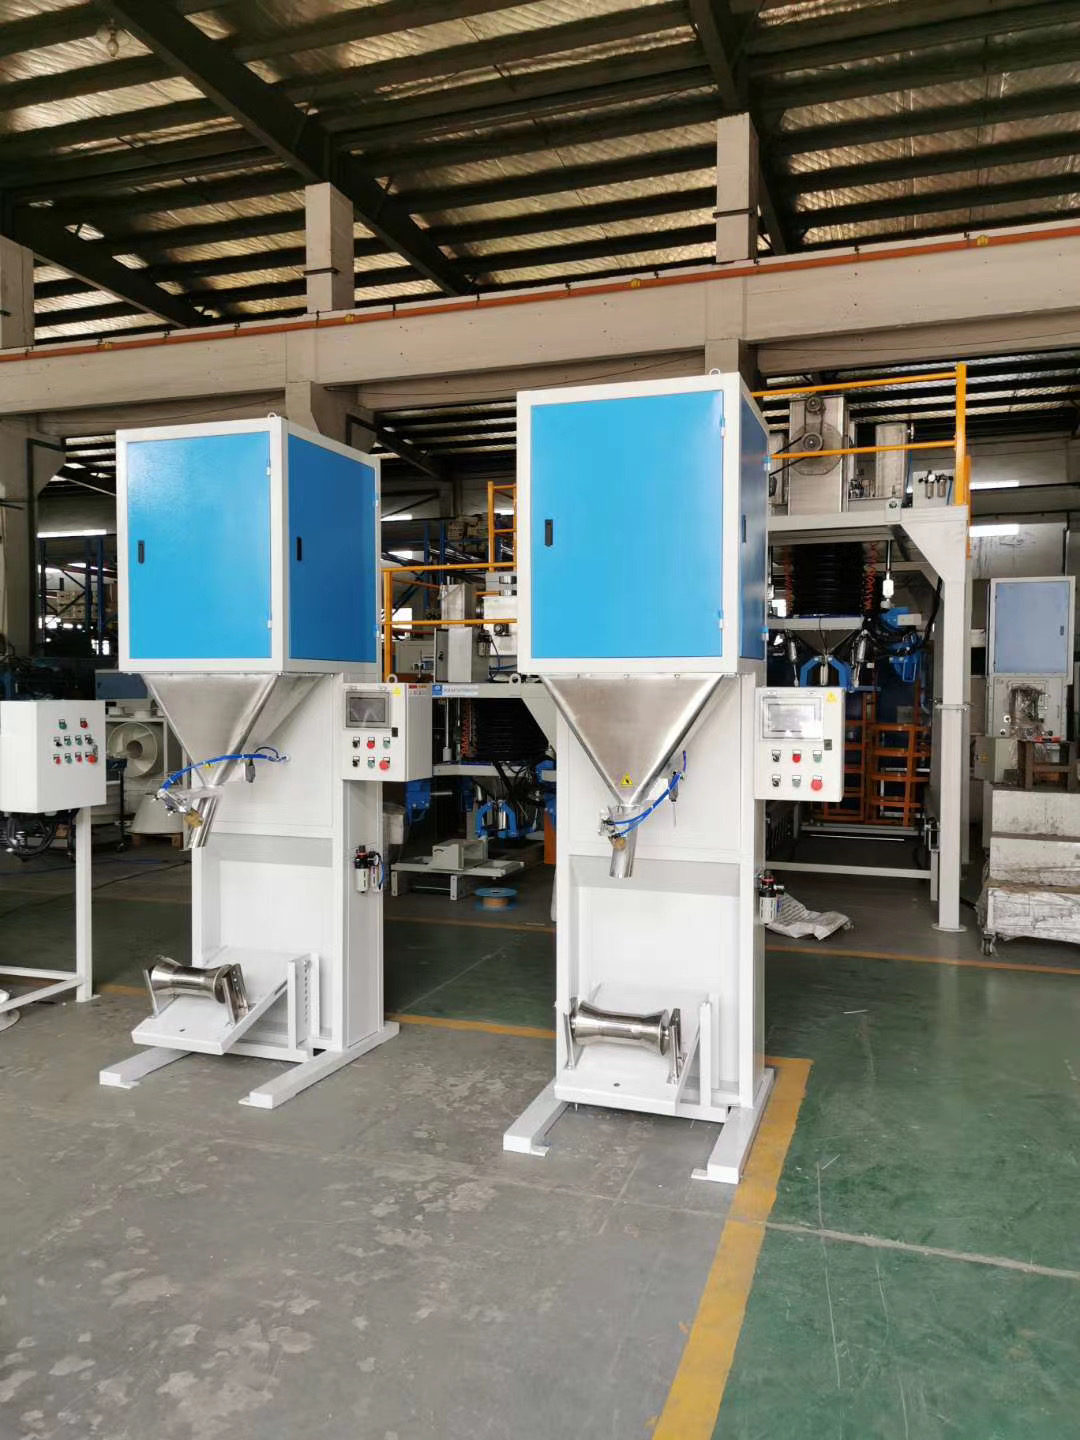 valve bag bagging machine for dry powder Activated coal FIBC packing machine for clean and dried corns Bagging line for maize seed bran packing machine Auto Robotic Palletiser Line Fully Automatic Val